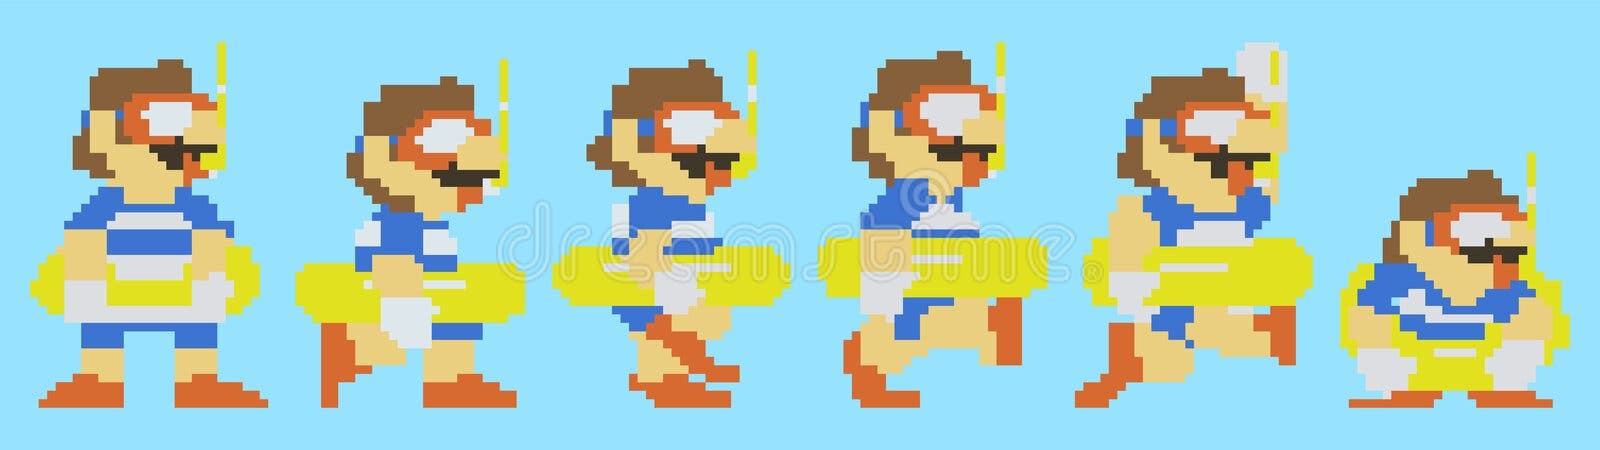 Mario at the End of Level, Art of Super Mario World Classic Video Game,  Pixel Design Vector Illustration Editorial Stock Image - Illustration of  editorial, gaming: 213002349